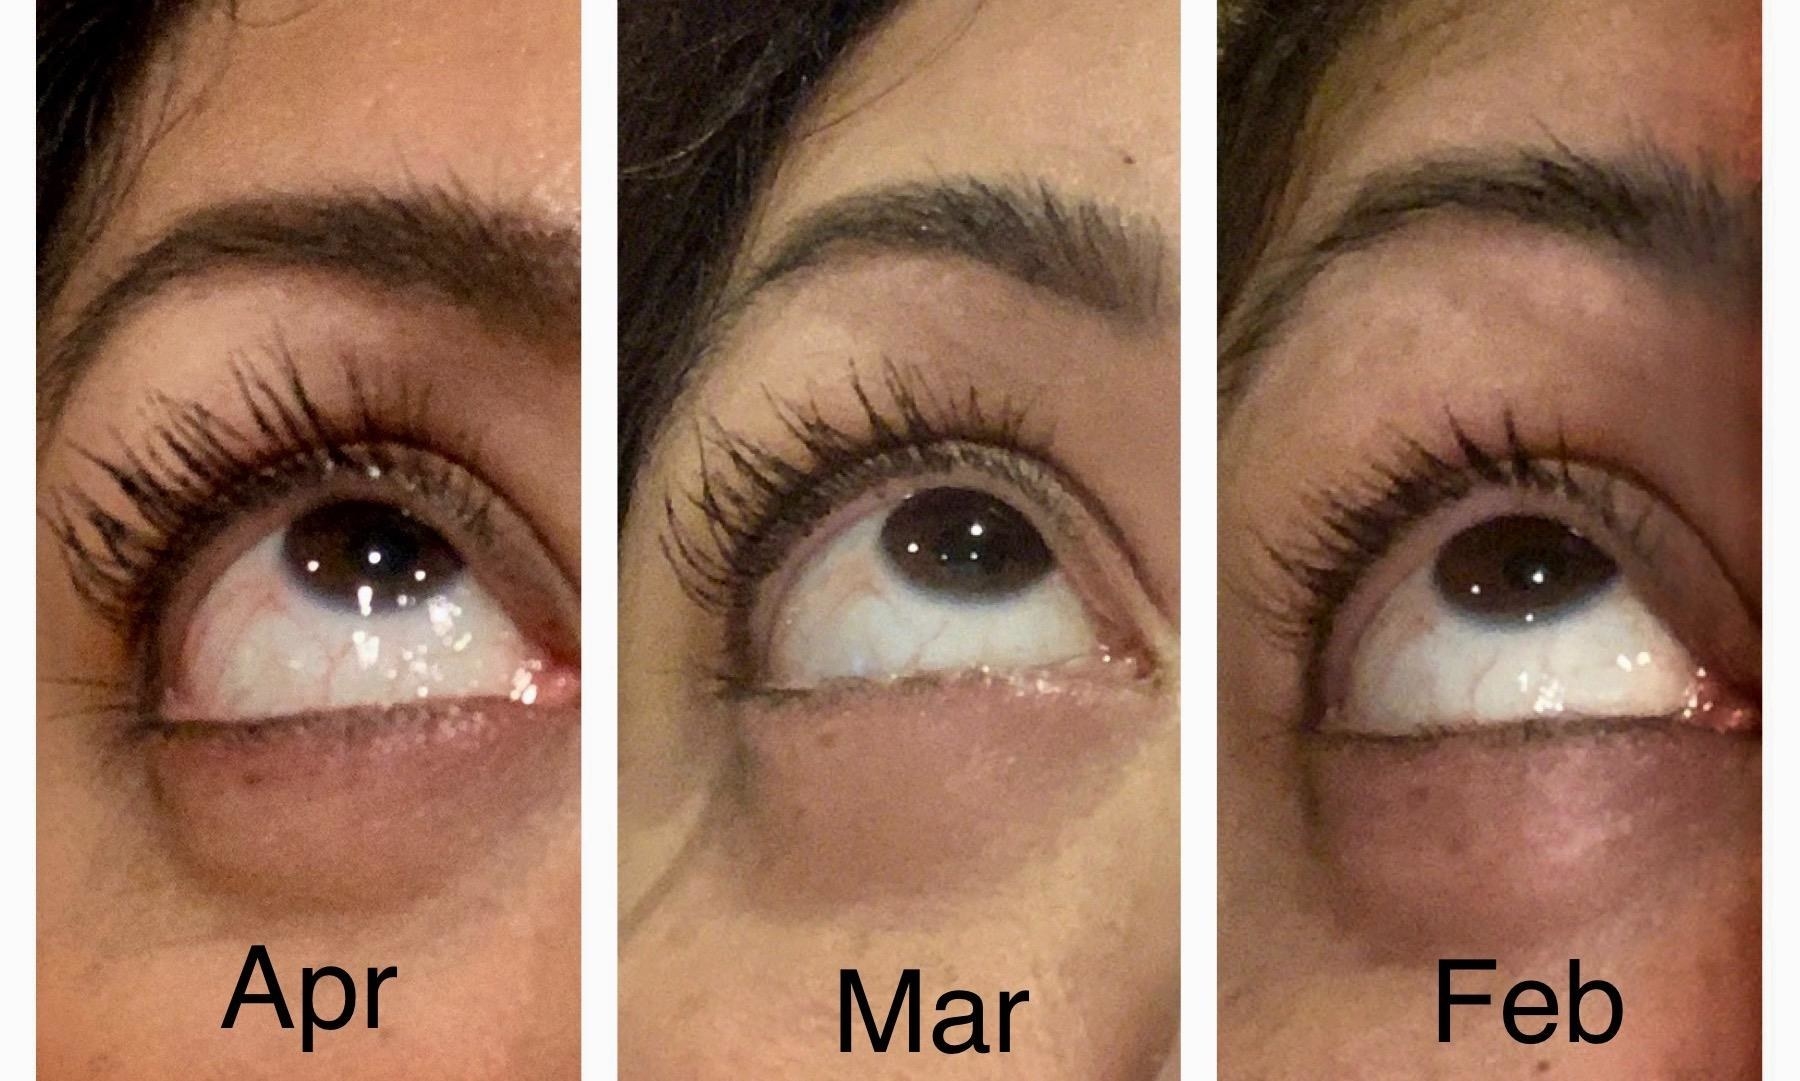 reviewer photo of their lashes in february, march, and april and you can tell that their lashes get longer and thicker looking as the months progress